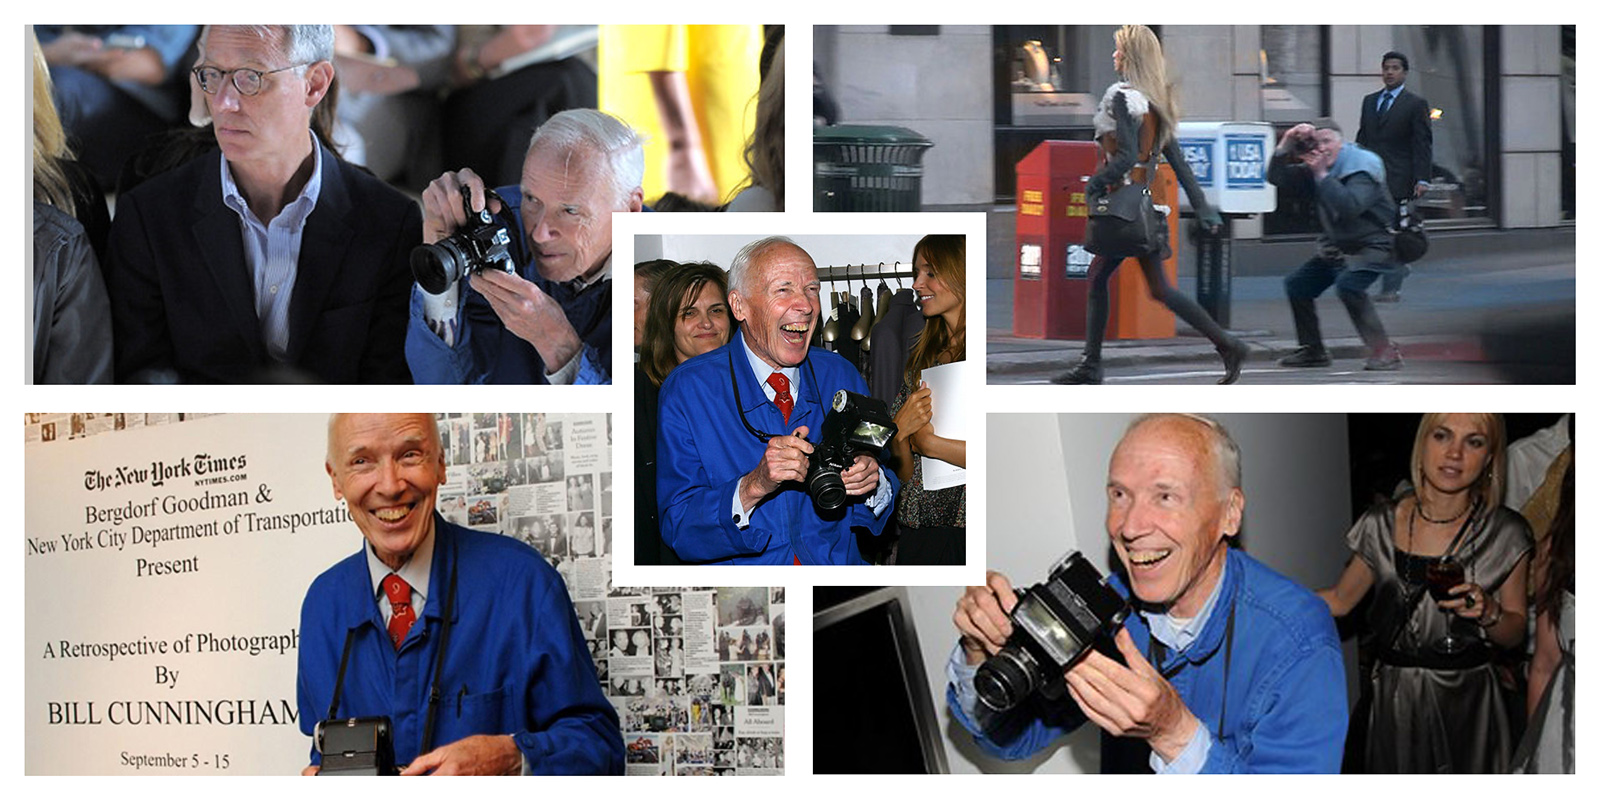 Bill Cunningham tribute to a vivacious old school photographer